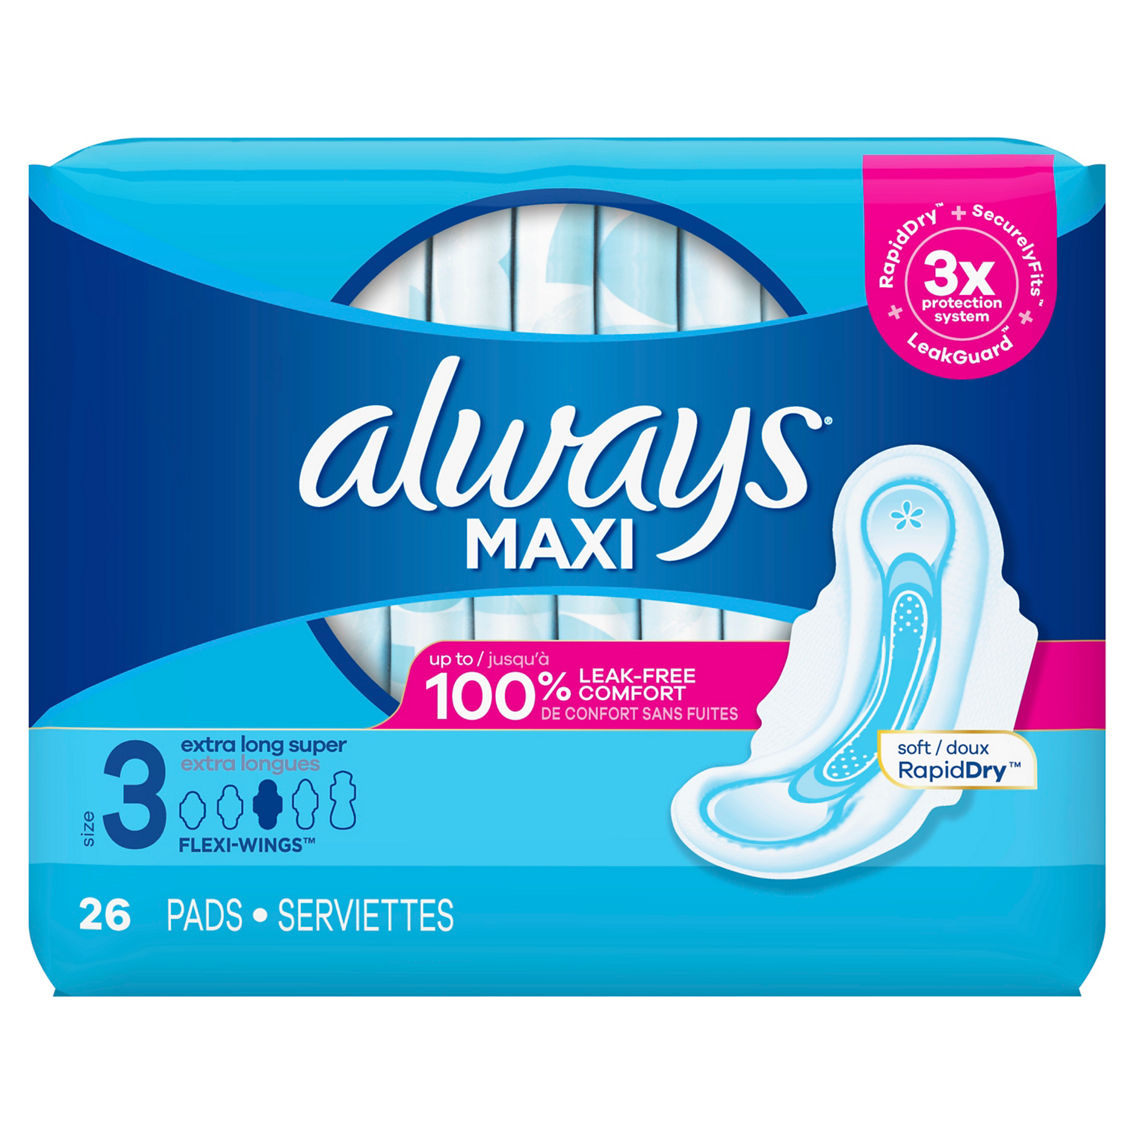 Always Ultra Thin Pads with Flexi-Wings Overnight Jumbo Pack Size 4 - 36 ct  pkg